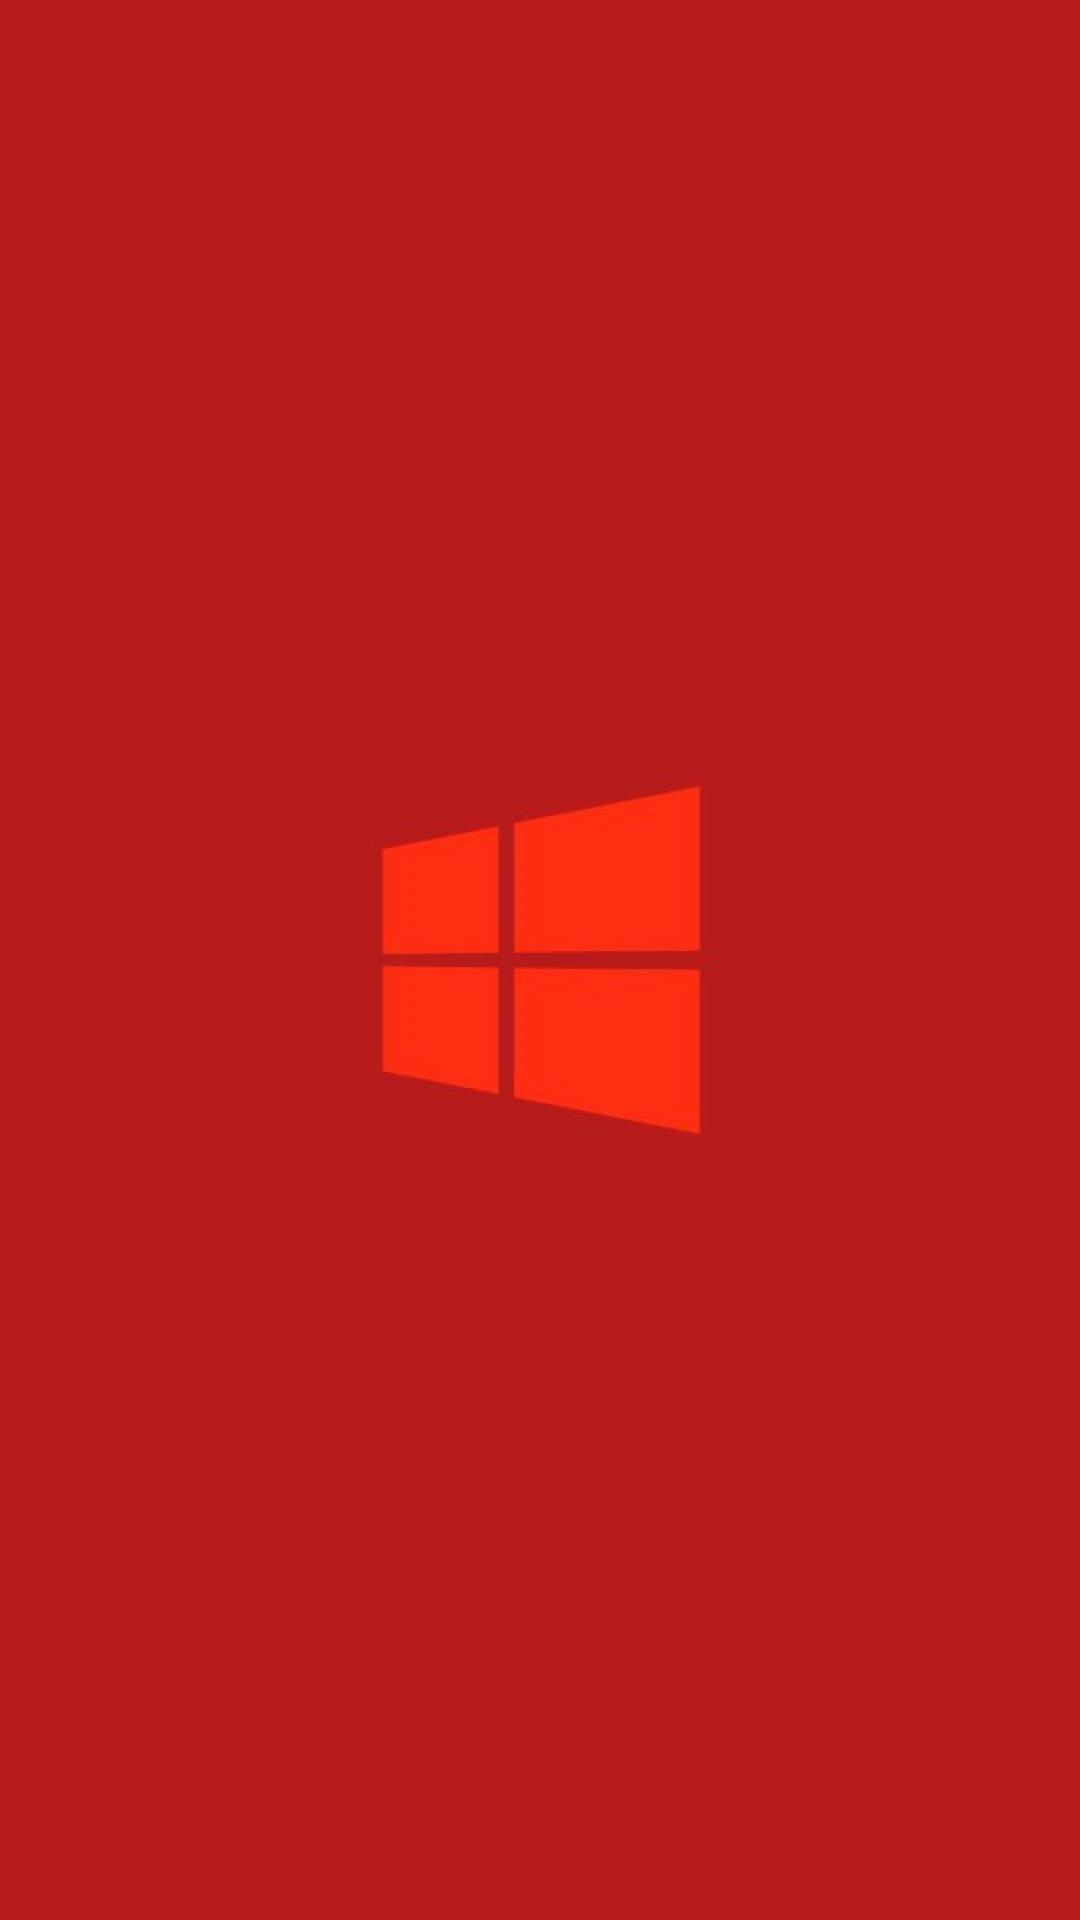 Red Windows Logo Wallpapers - Top Free Red Windows Logo Backgrounds